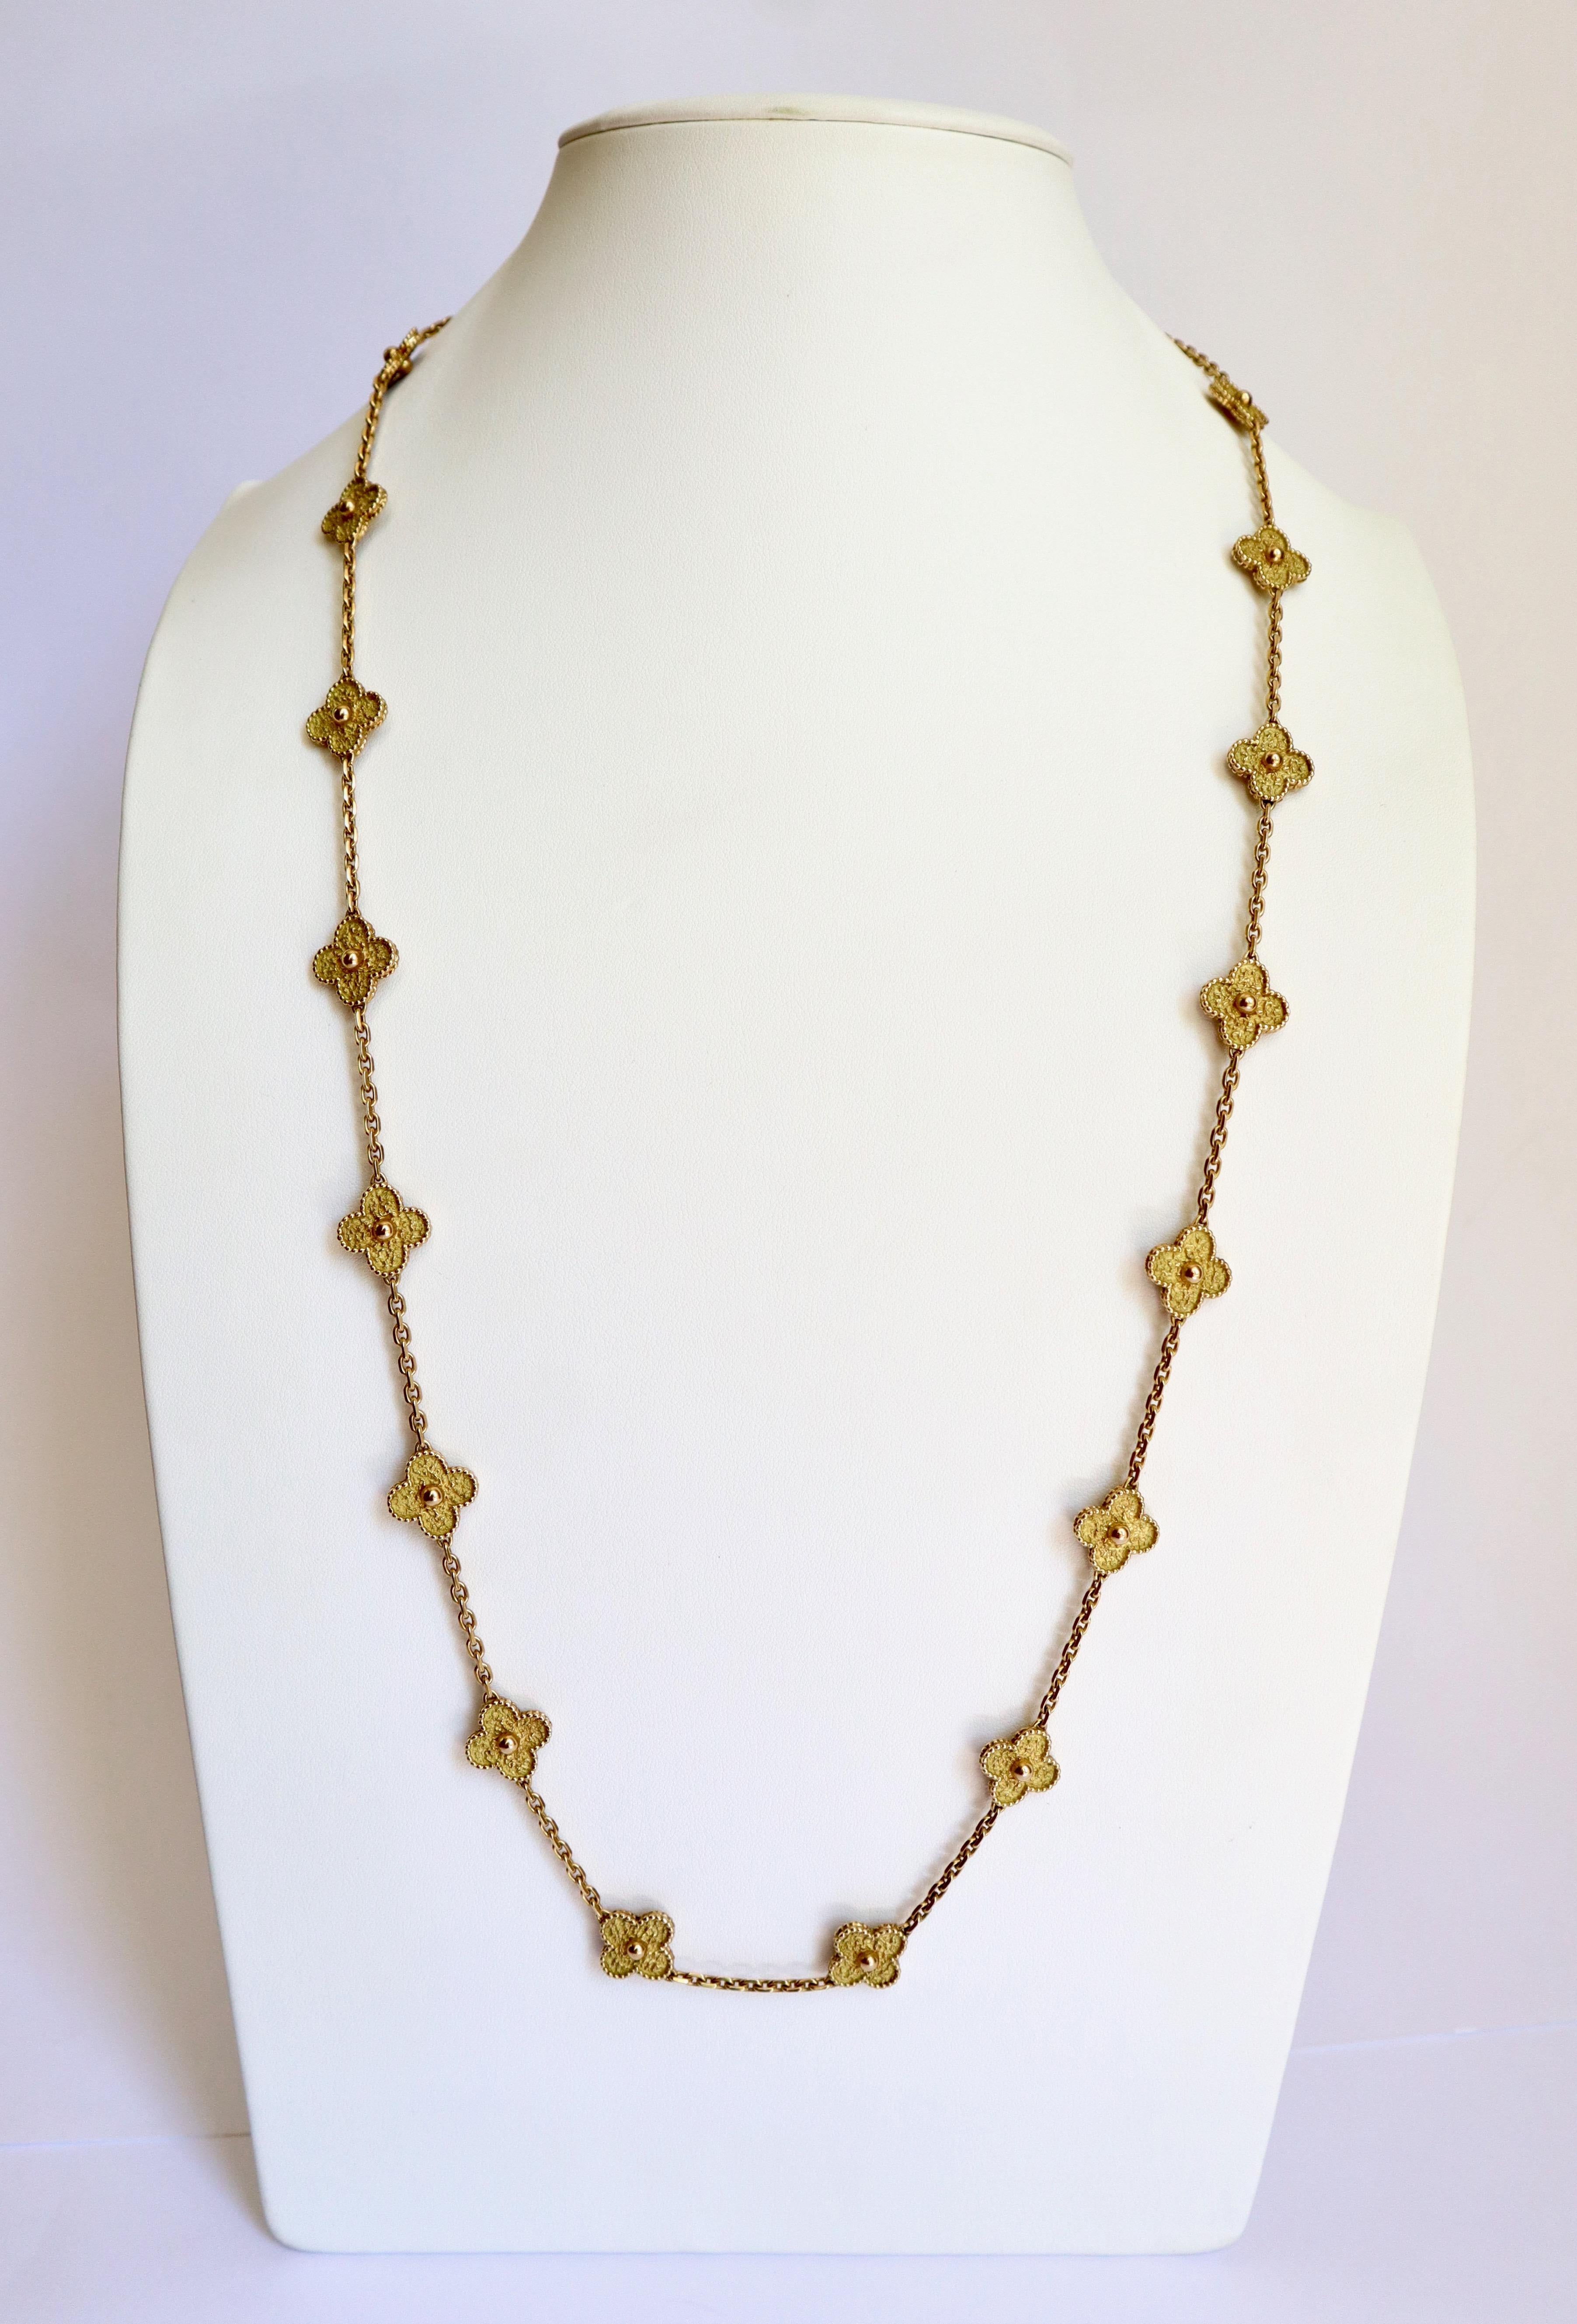 VAN CLEEF AND ARPELS Vintage Alhambra Necklace or Sautoir in 18 carat yellow gold with four-leaf clover adorned with delicate outline of gold beads 20 motifs. 
Signed VCA and numbered 
Alhambra model Sautoir circa 1975

Faithful to the first